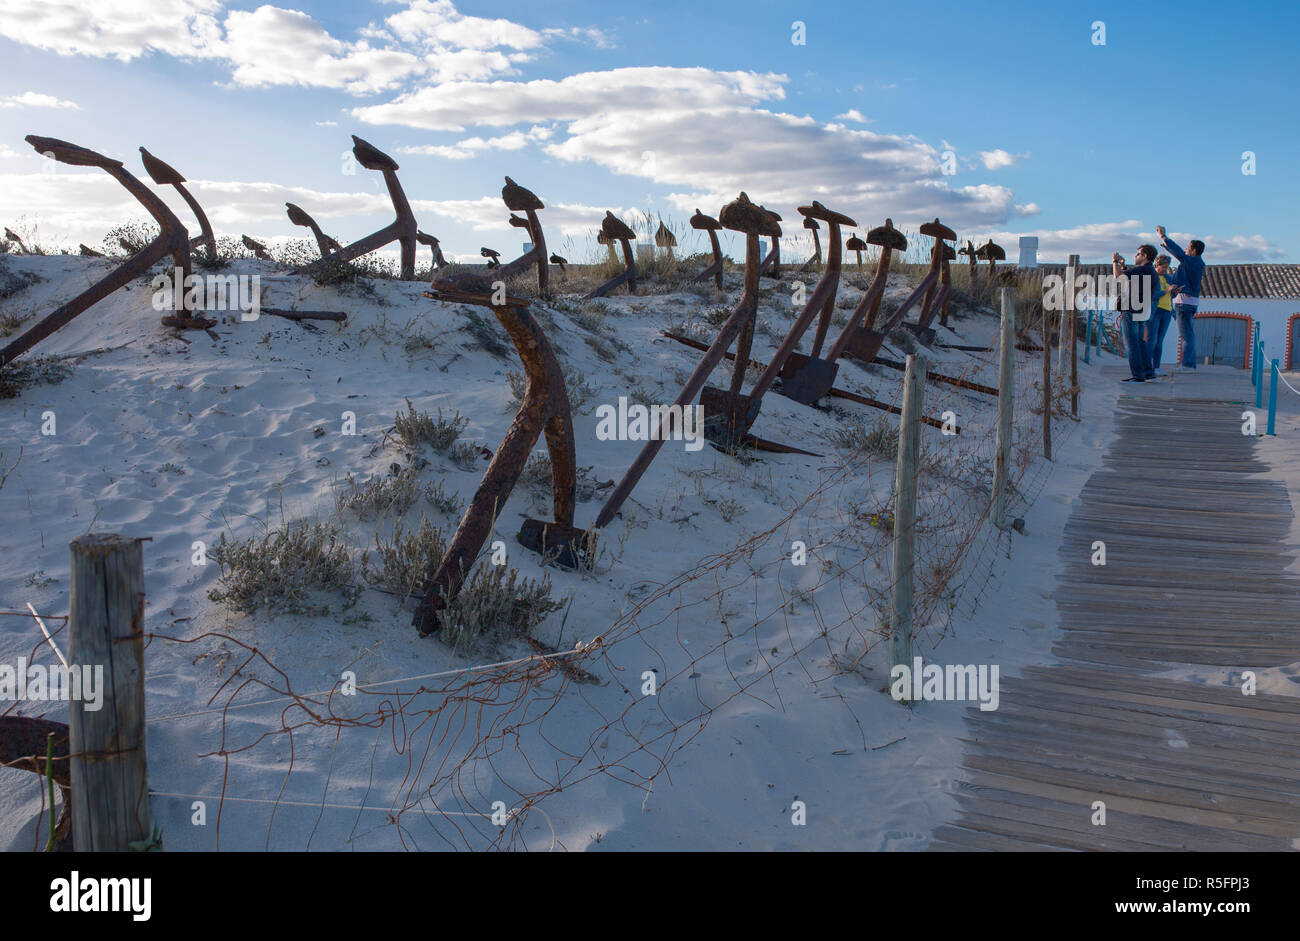 Tavira, Portugal - Oct 14th, 2018: Tourists taking pictures at Cemetery of Anchors. Memorial monument to dead fishermen of tuna industry in Portugal.  Stock Photo